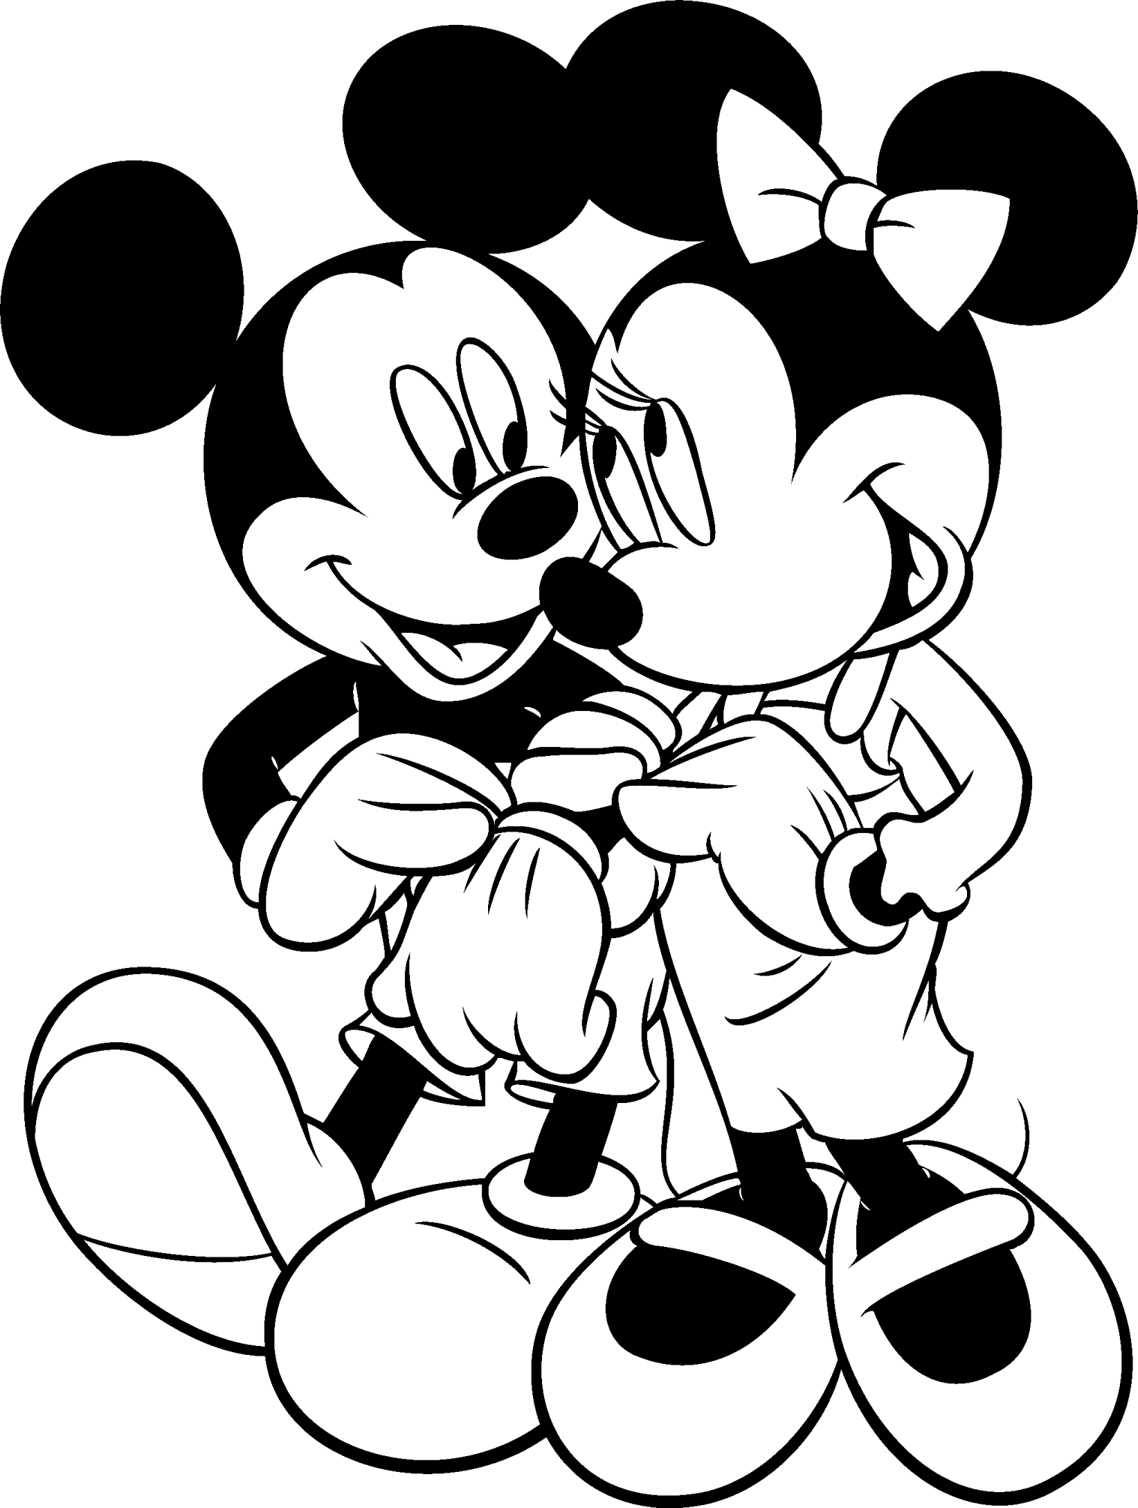 Mickey Minnie Mouse Coloring Pages